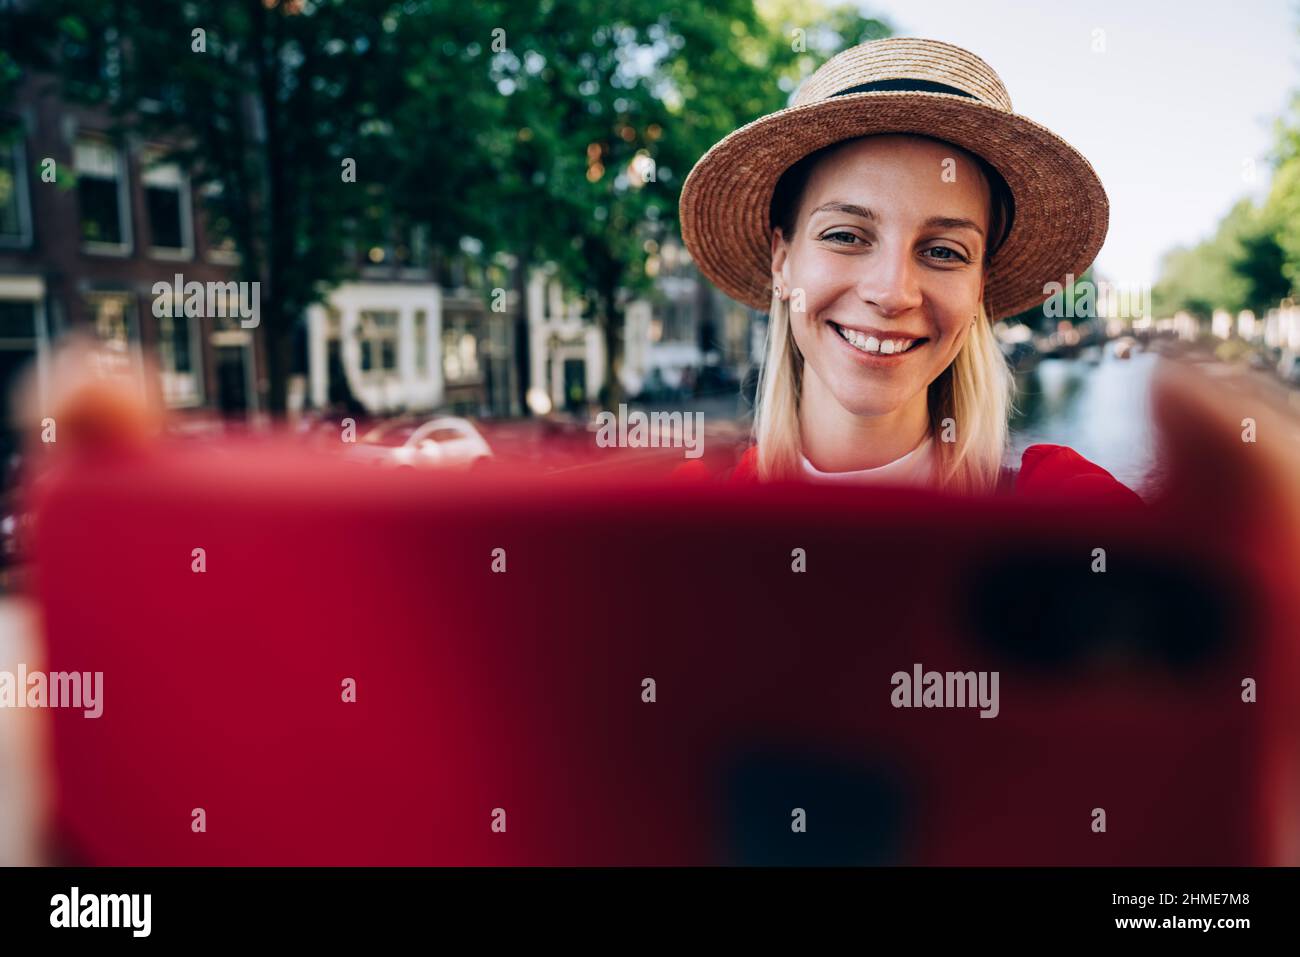 Excited woman in hat taking selfie in city Stock Photo